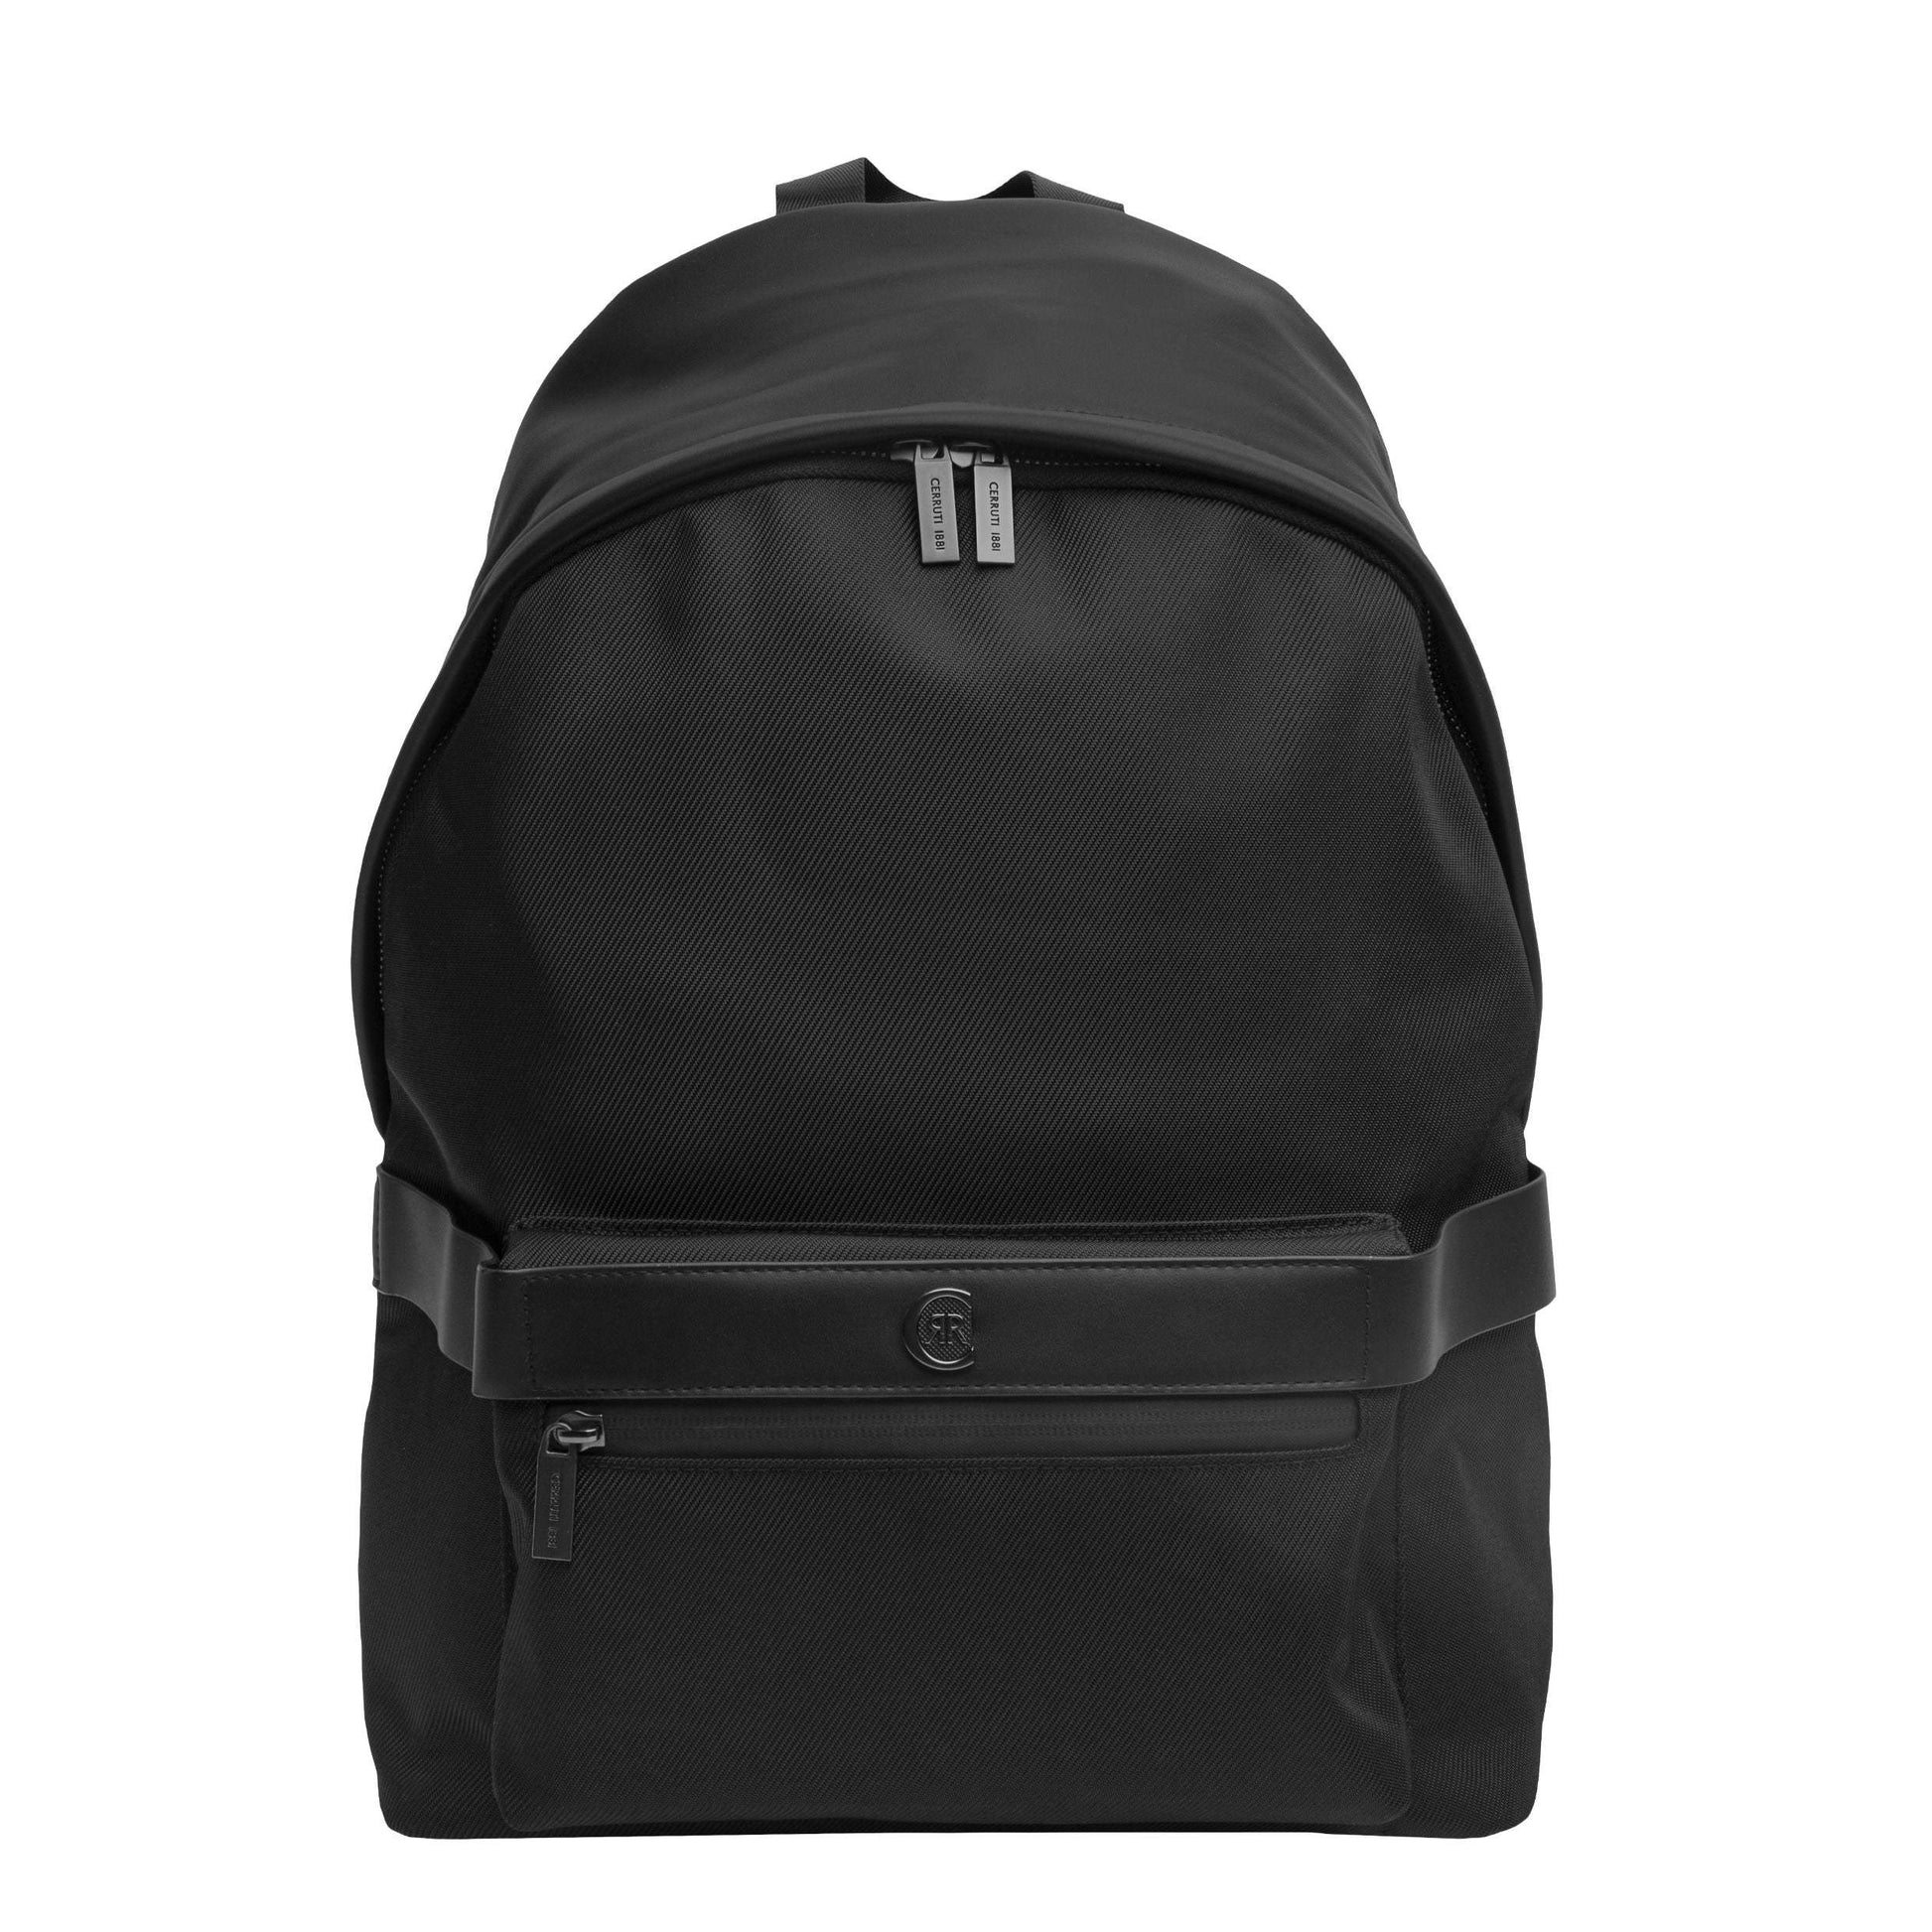 Bond Backpack by Cerruti 1881 - The Luxury Promotional Gifts Company Limited